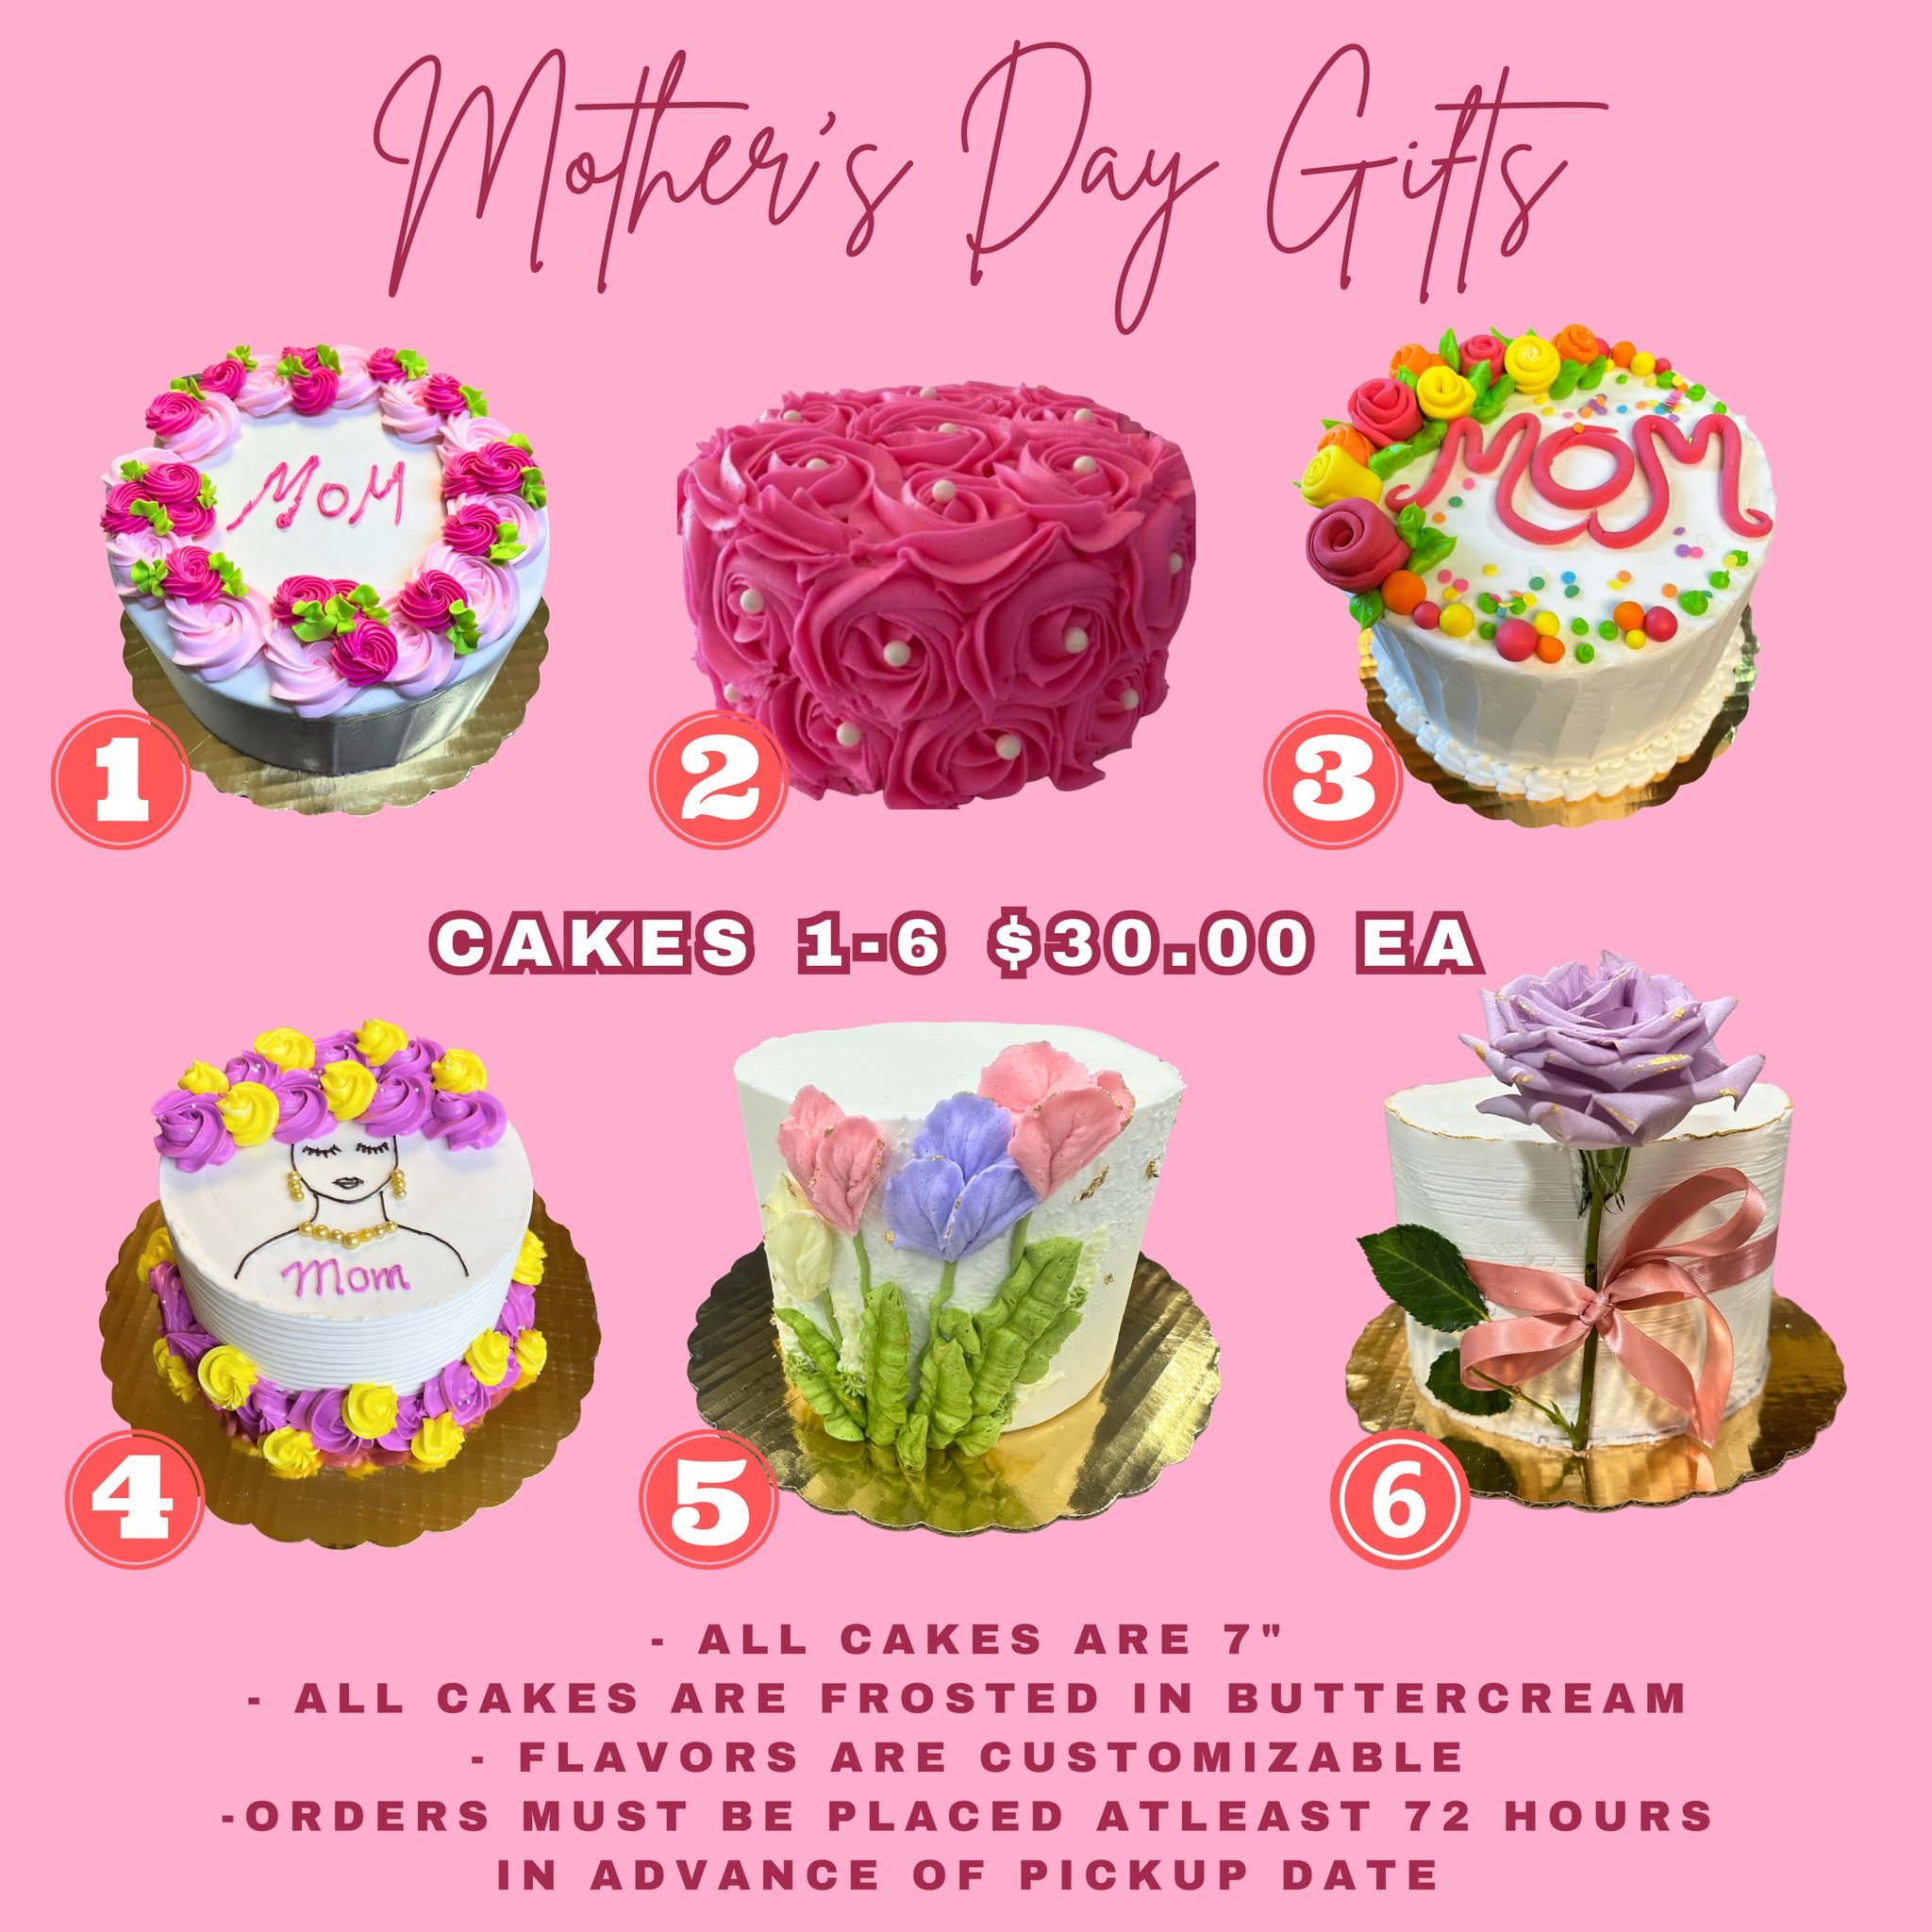 🌸🍰 Celebrate Mother's Day with something sweet! 🍰🌸

Introducing our special Mother's Day Menu, crafted with love and care just for her. Treat your mom to our delightful selection of pastries, cakes, and treats that will surely make her day extra 